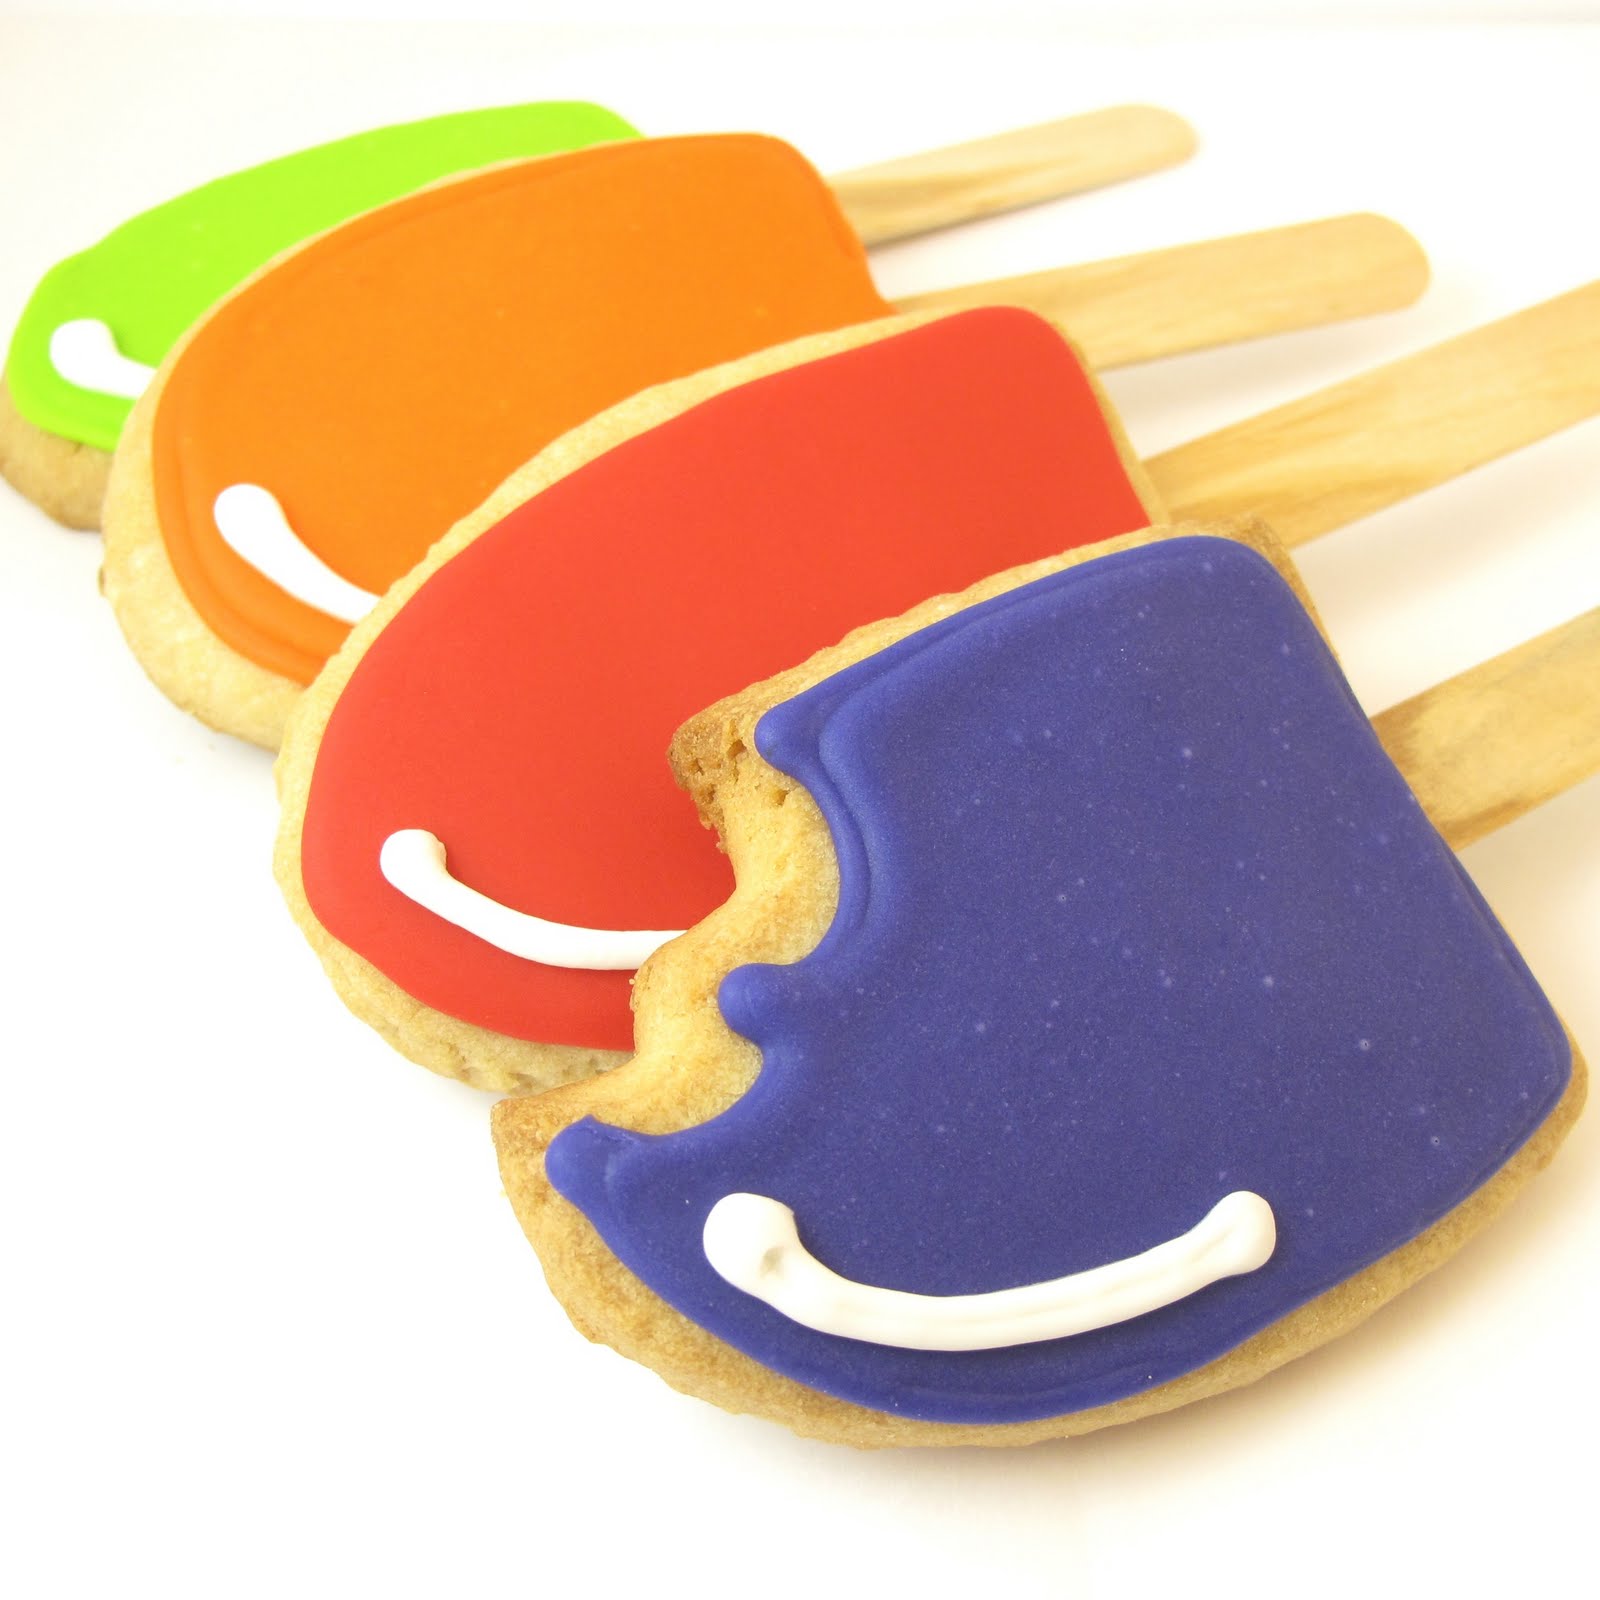 popsicles that never melt (because they are cookies) | The ...